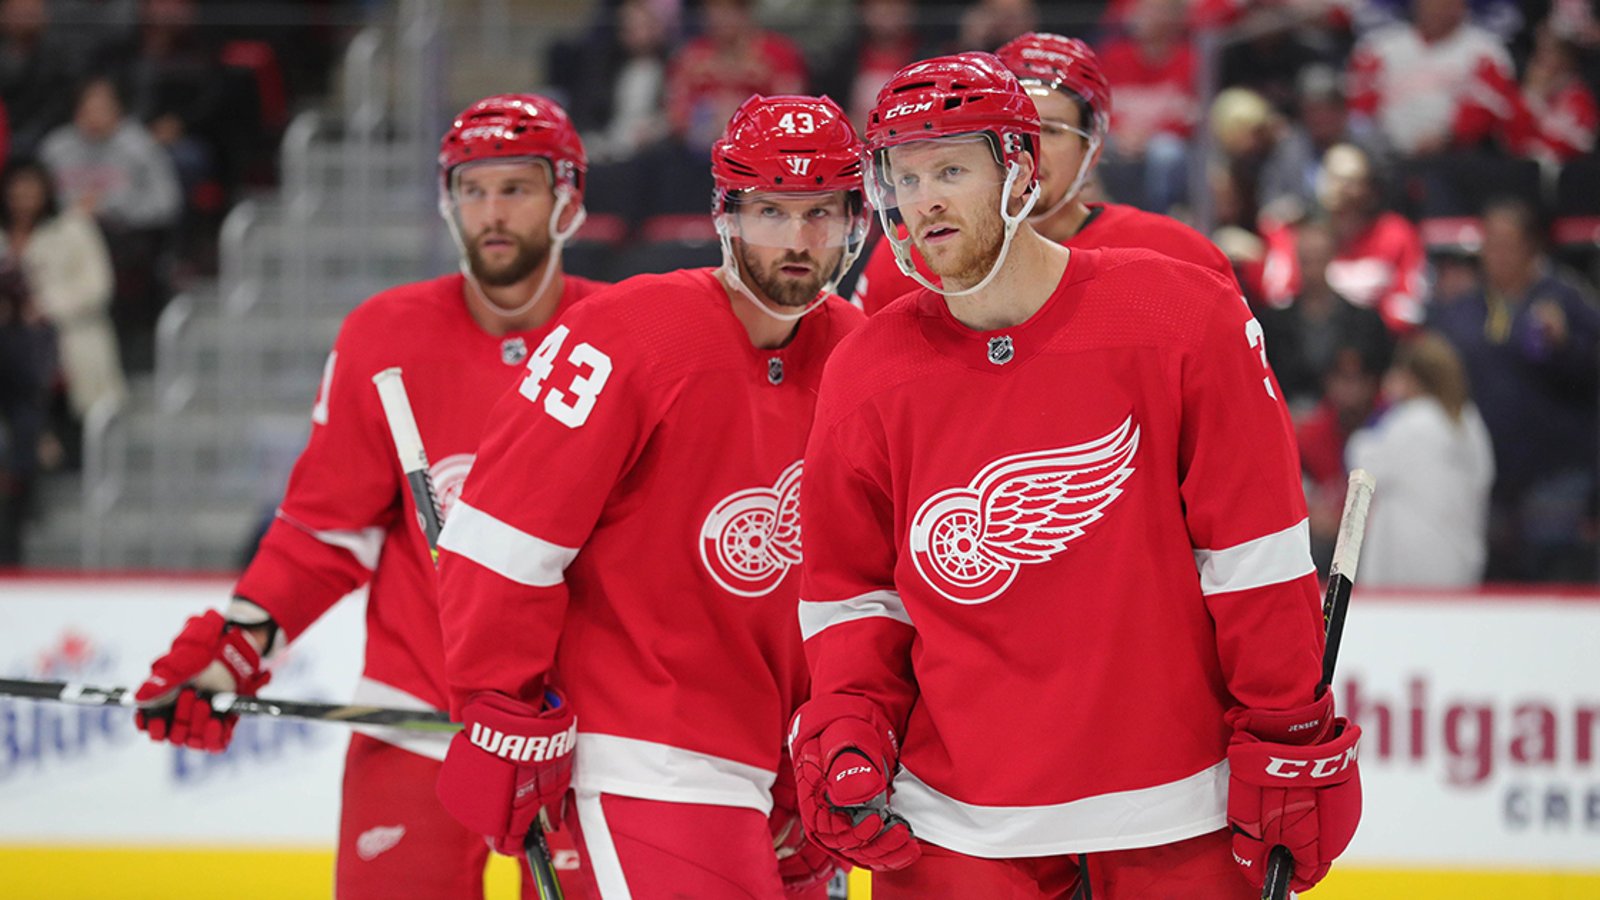 Report: Big changes coming for Red Wings